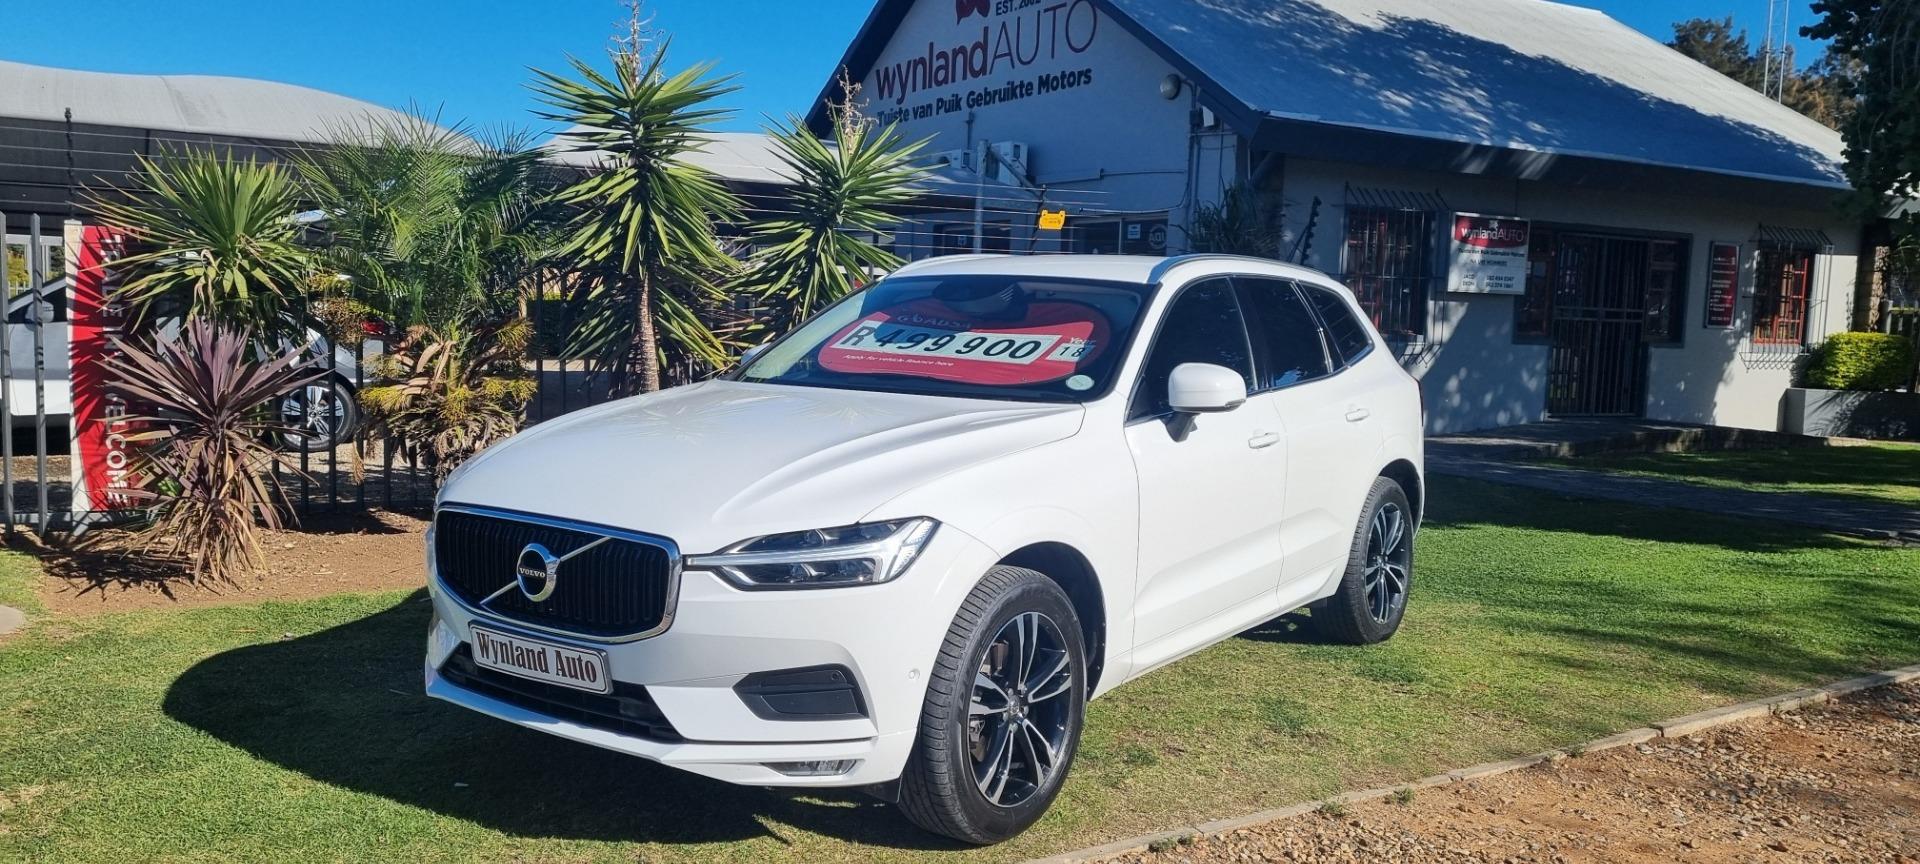 2018 Volvo XC60 D4 AWD Momentum For Sale